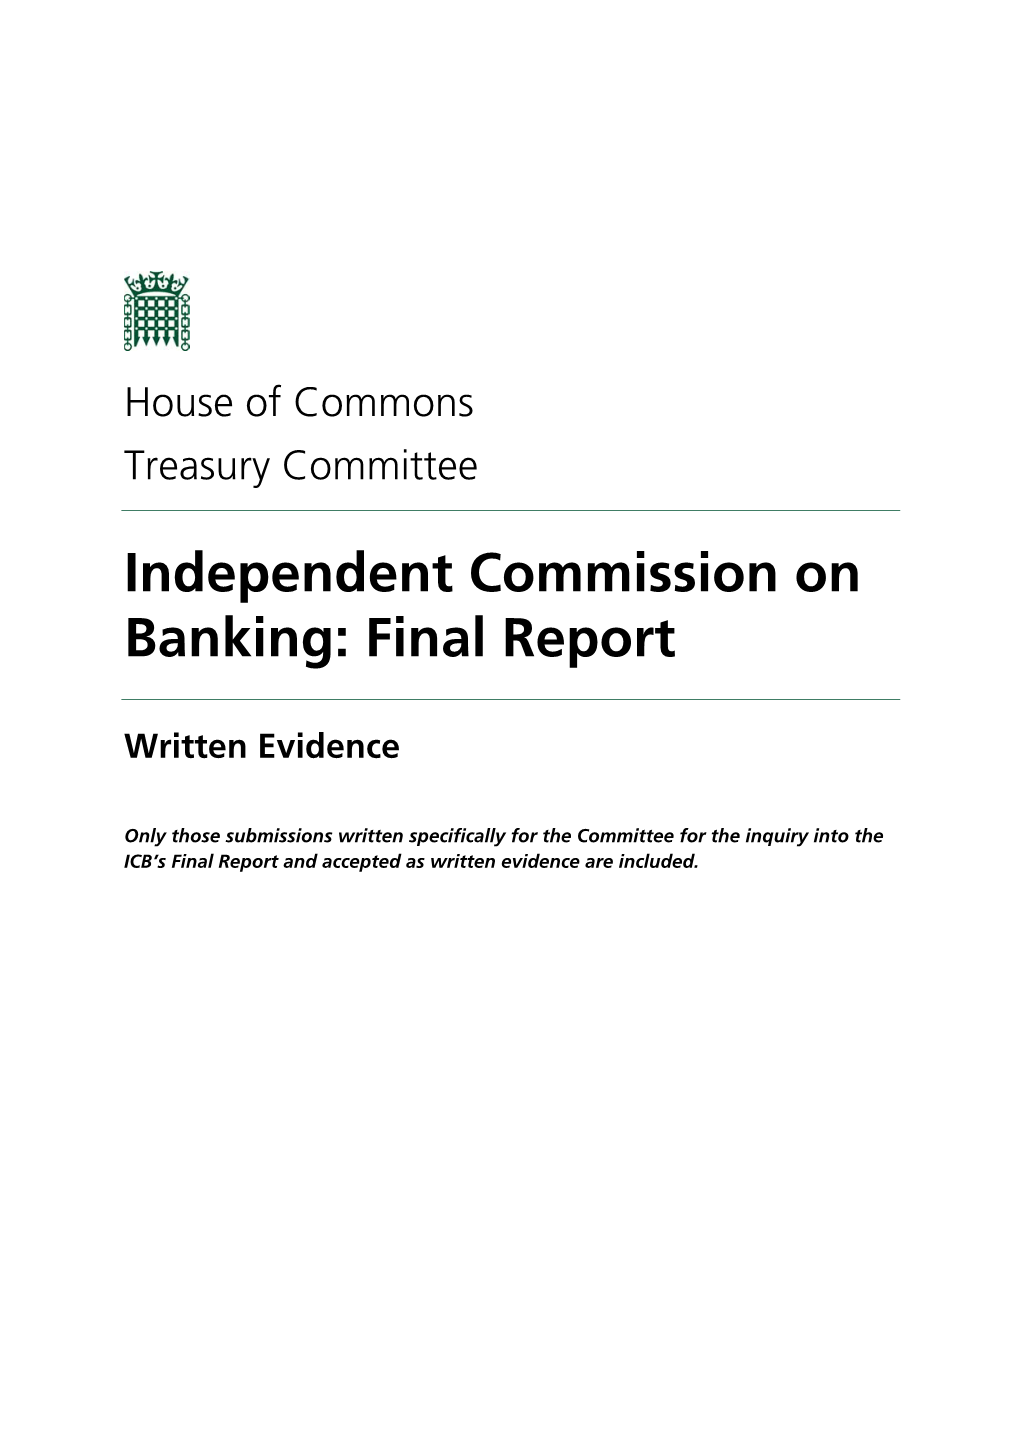 Independent Commission on Banking: Final Report